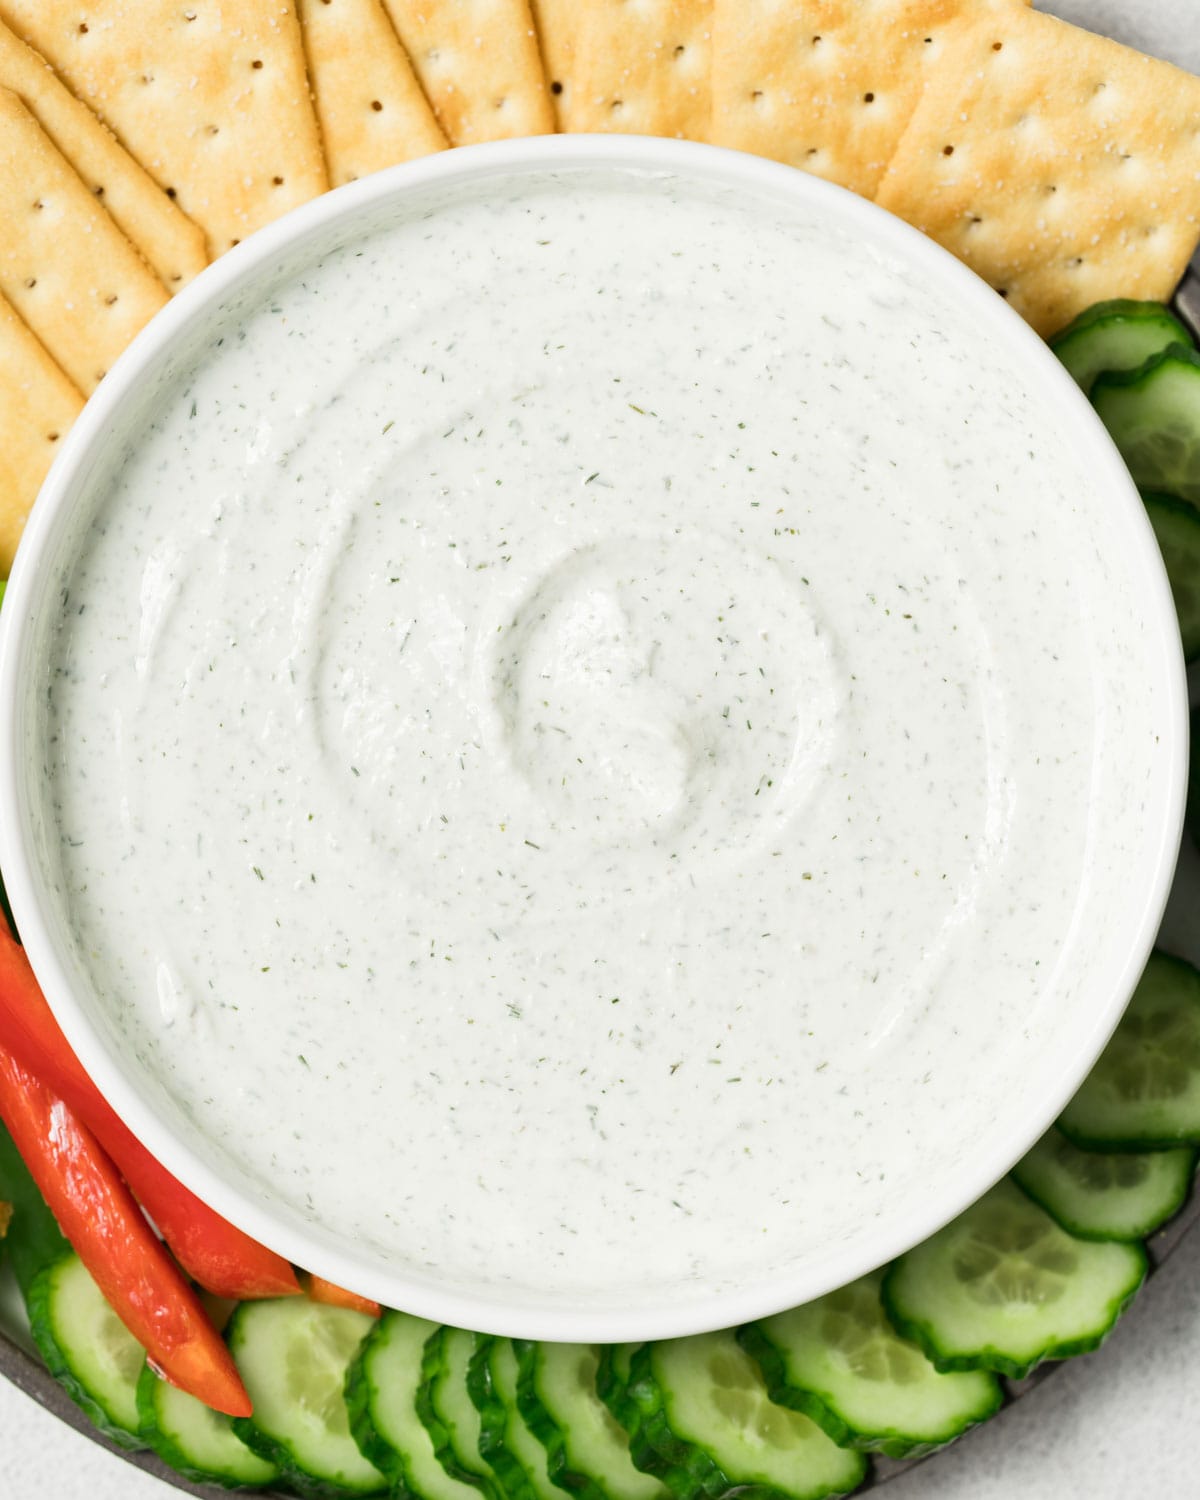 Cottage cheese ranch dip served with fresh cut veggies and crackers.